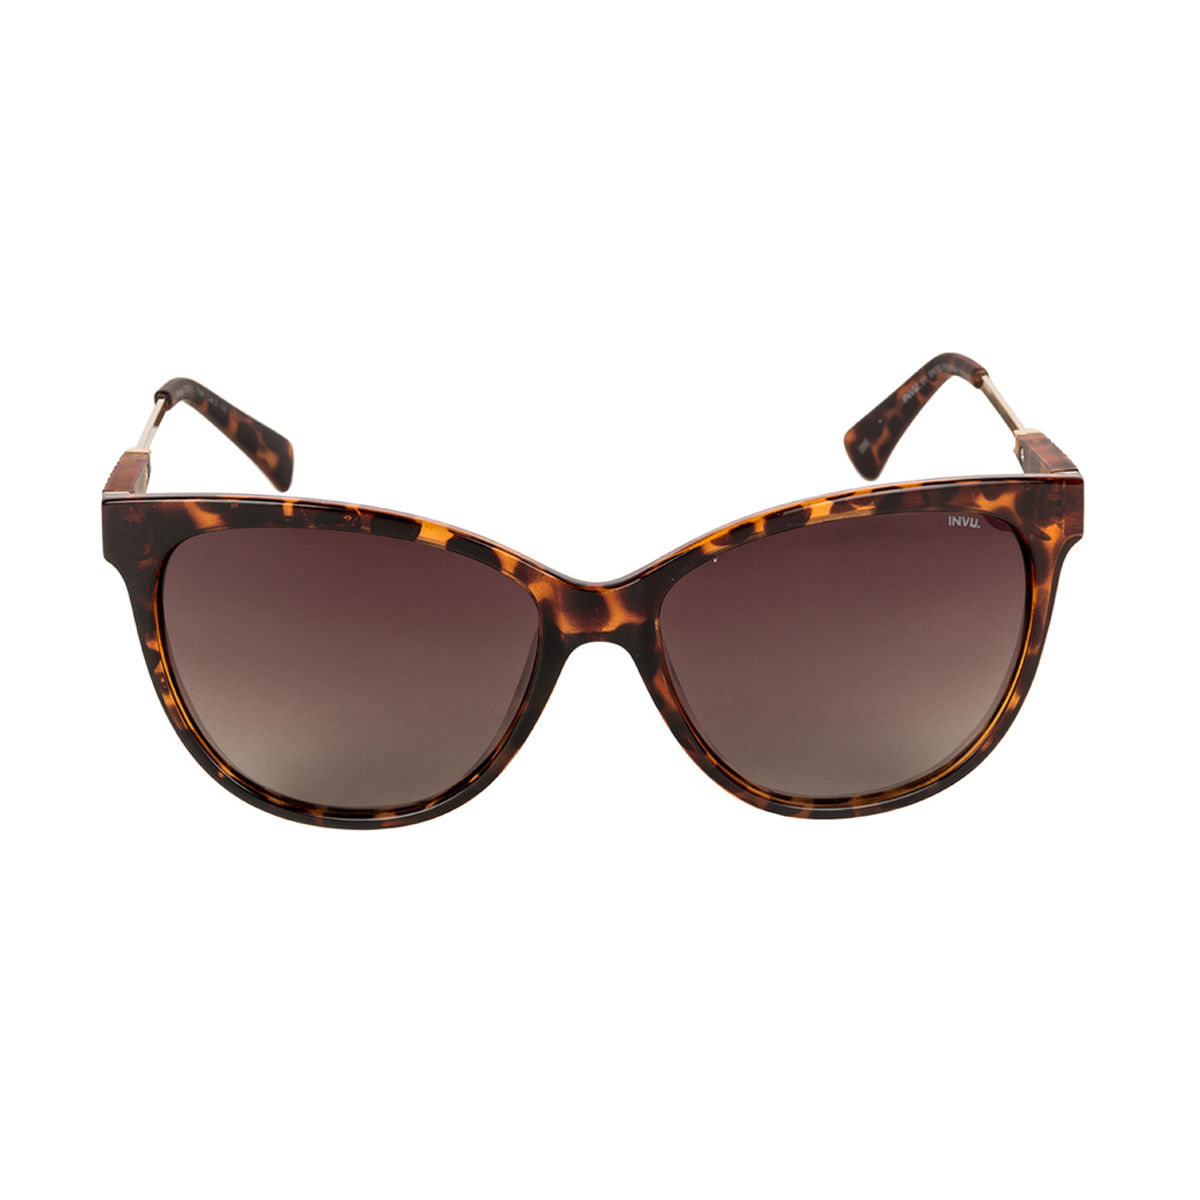 Invu Sunglasses Cat-Eye With Brown Lens For Women